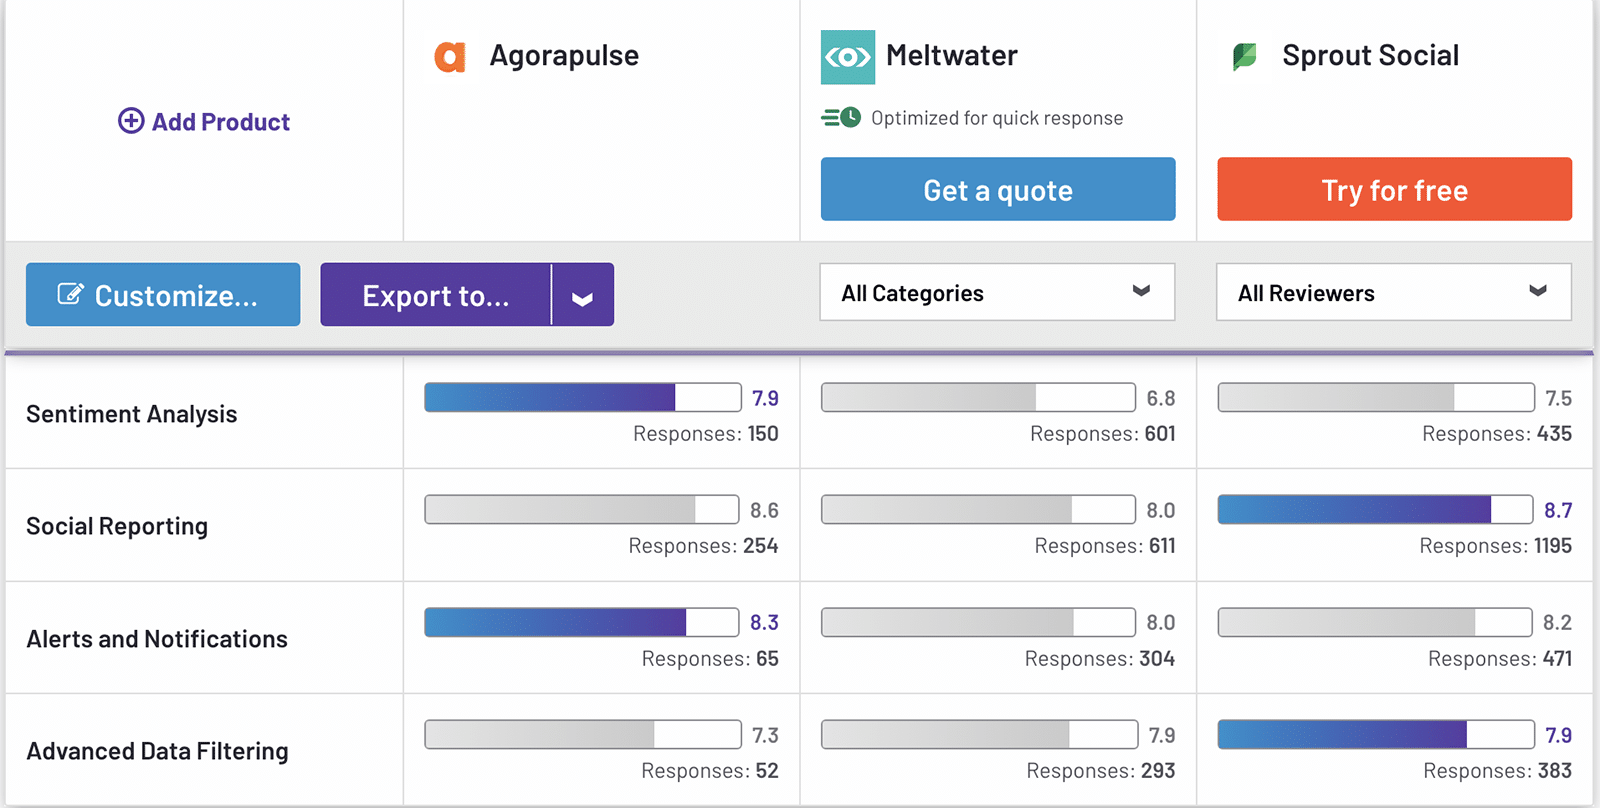 G2 comparison between Agorapulse, Meltwater, and Sprout Social showing data analysis